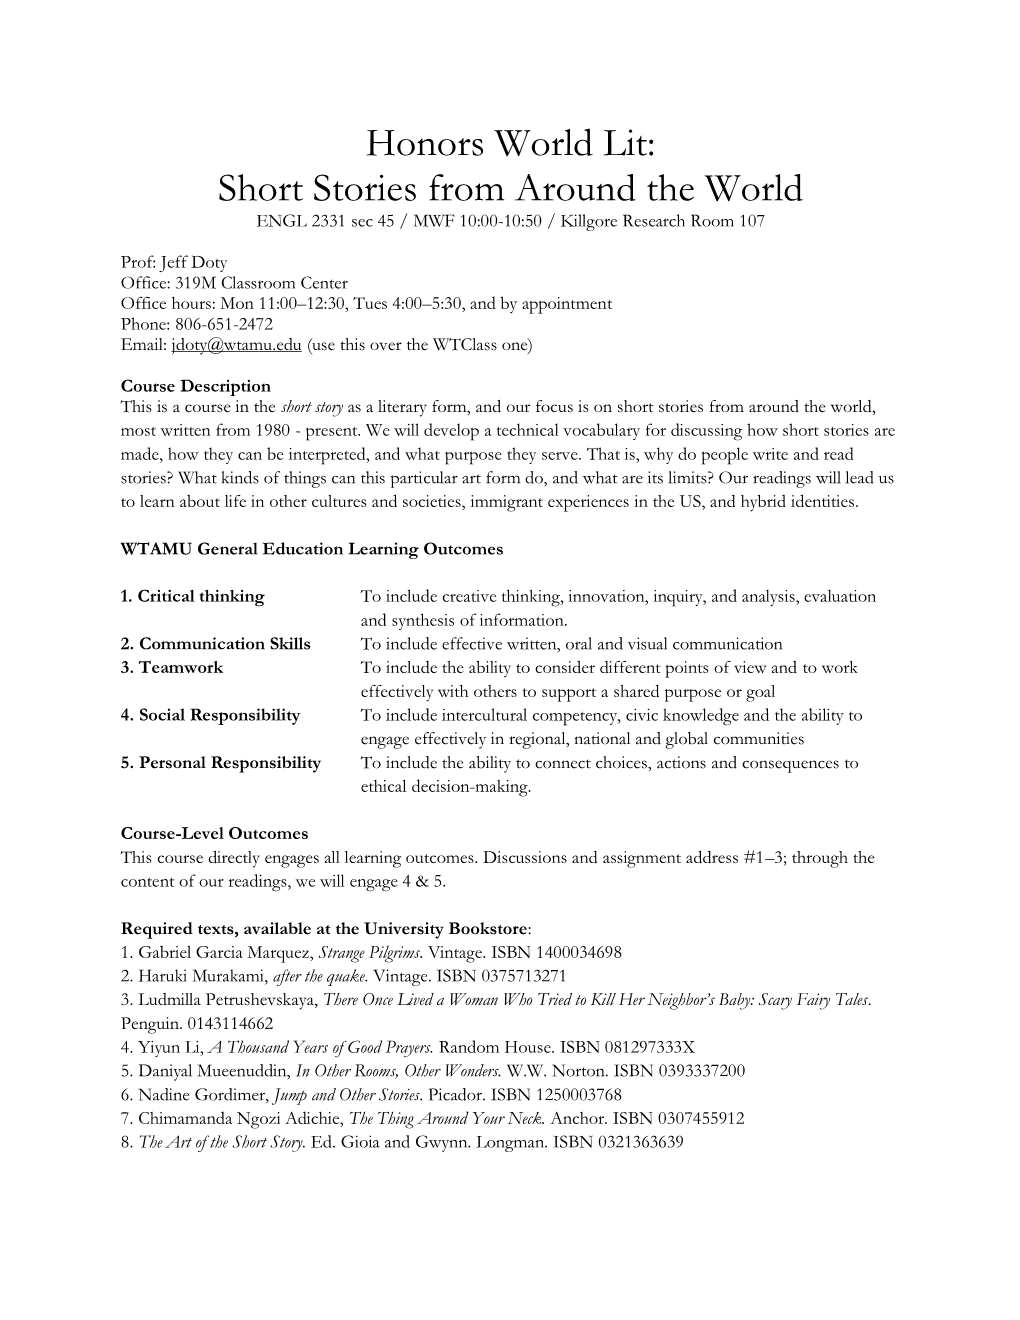 Honors World Lit: Short Stories from Around the World ENGL 2331 Sec 45 / MWF 10:00-10:50 / Killgore Research Room 107